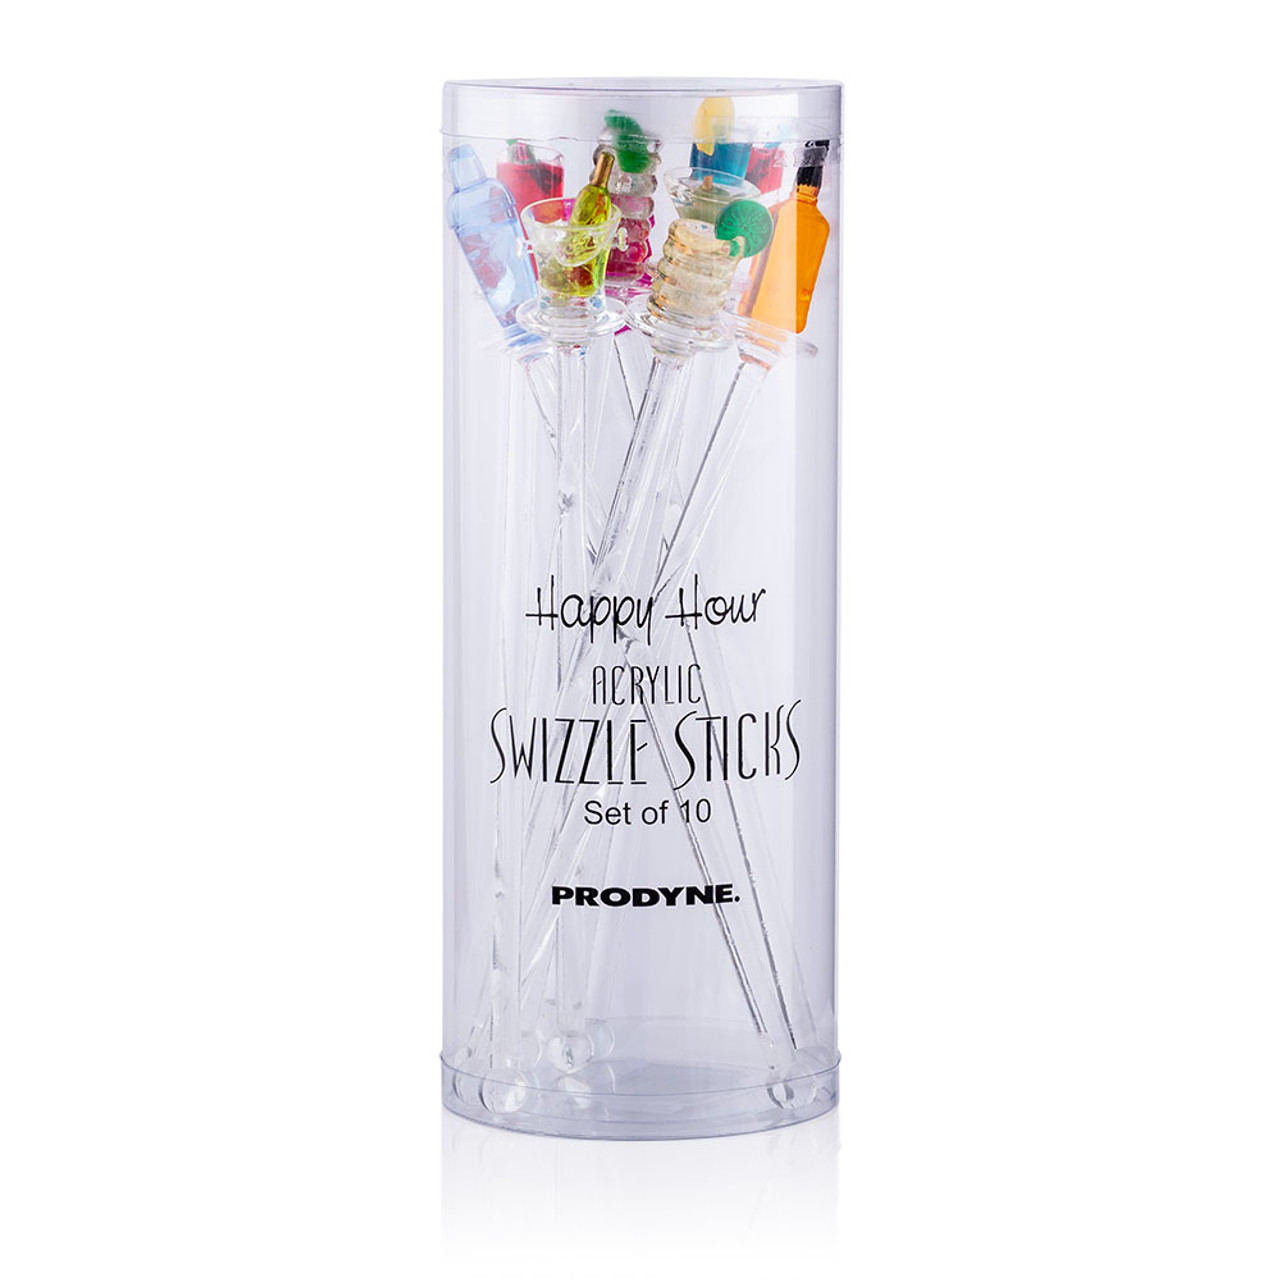 https://cdn11.bigcommerce.com/s-cznxq08r7/images/stencil/1280x1280/products/161/8499/s-10-h-happy_hour_drink_swizzle_stick_stirrers_-_set_of_10-1__34503.1590772030.jpg?c=1